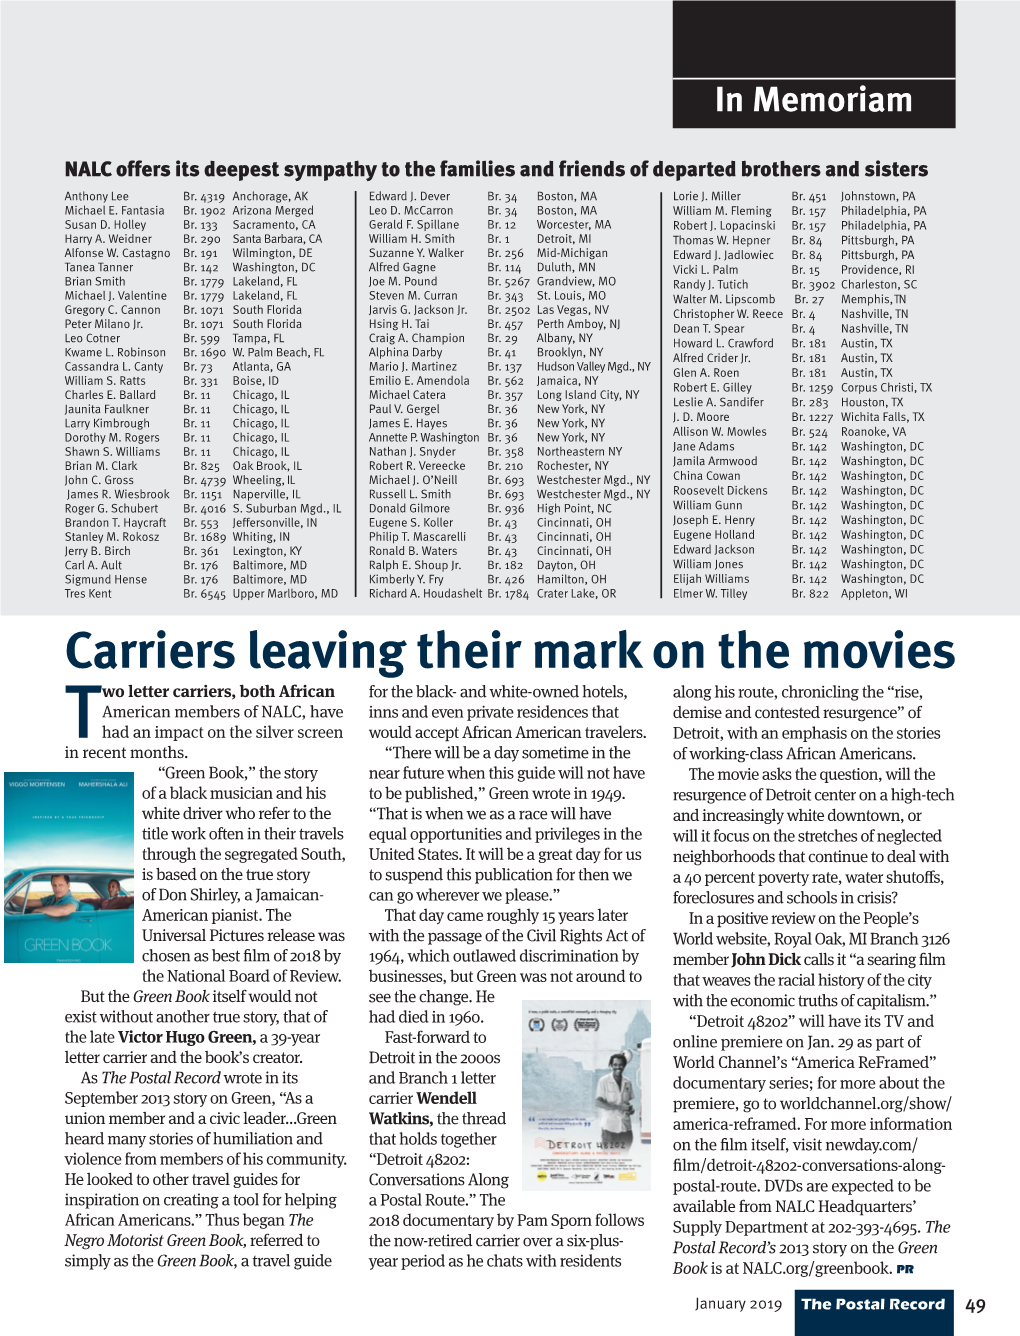 Carriers Leaving Their Mark on the Movies